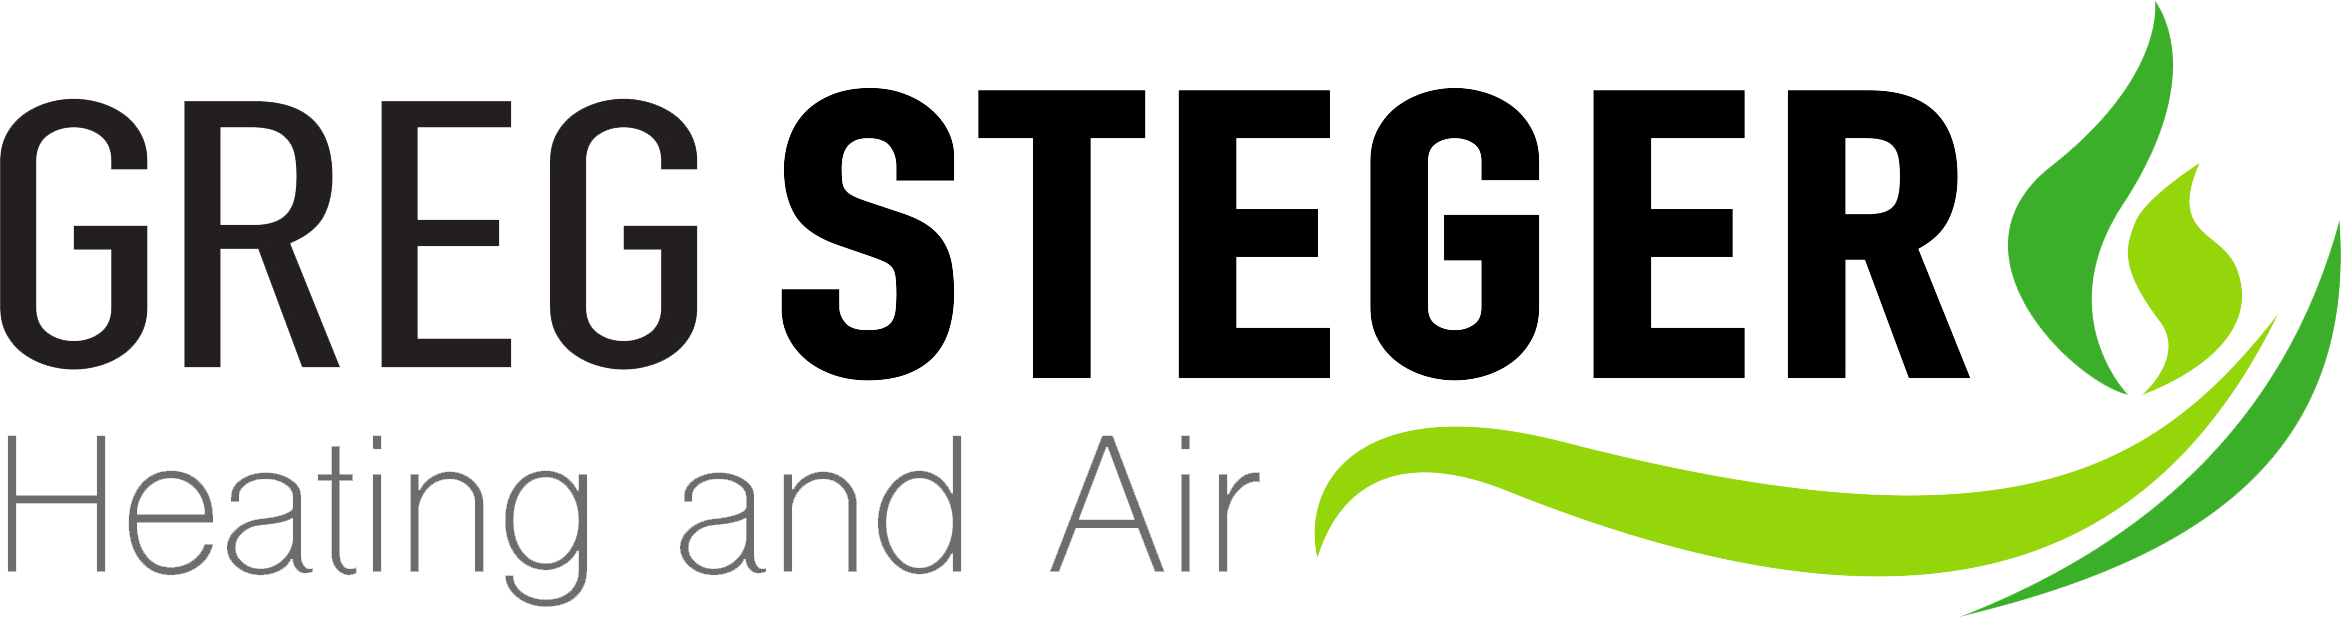 Greg Steger Heating and Air! Your go to for Furnace and Heat Pump repair in Sheboygan WI!